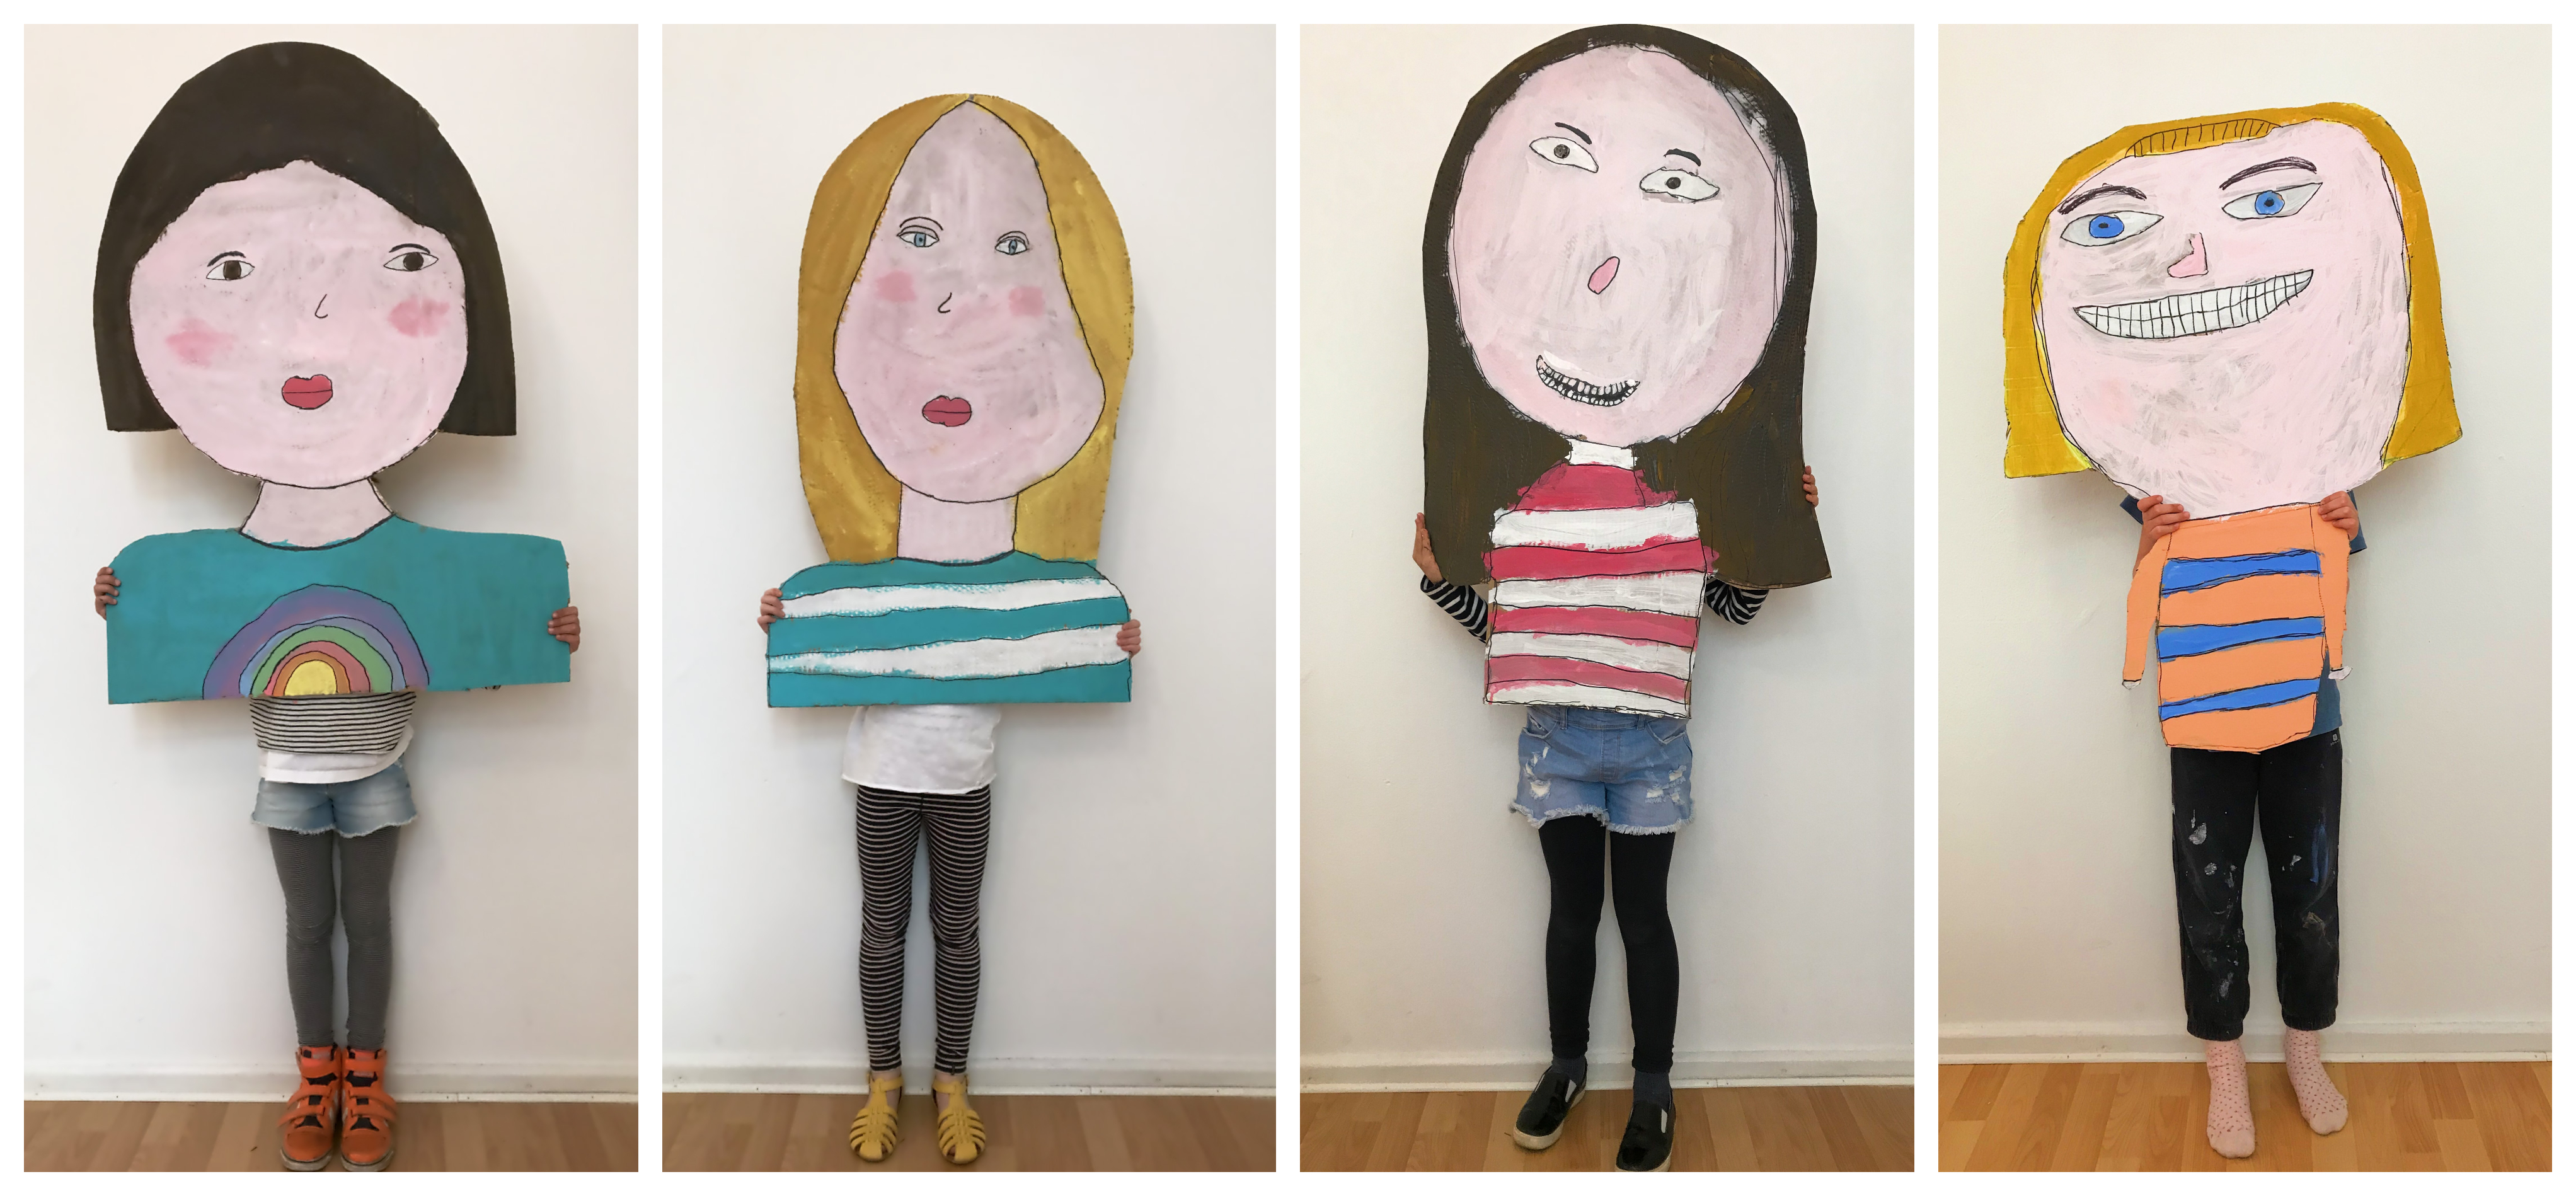 Life Sized Self Portrait Project for Kids